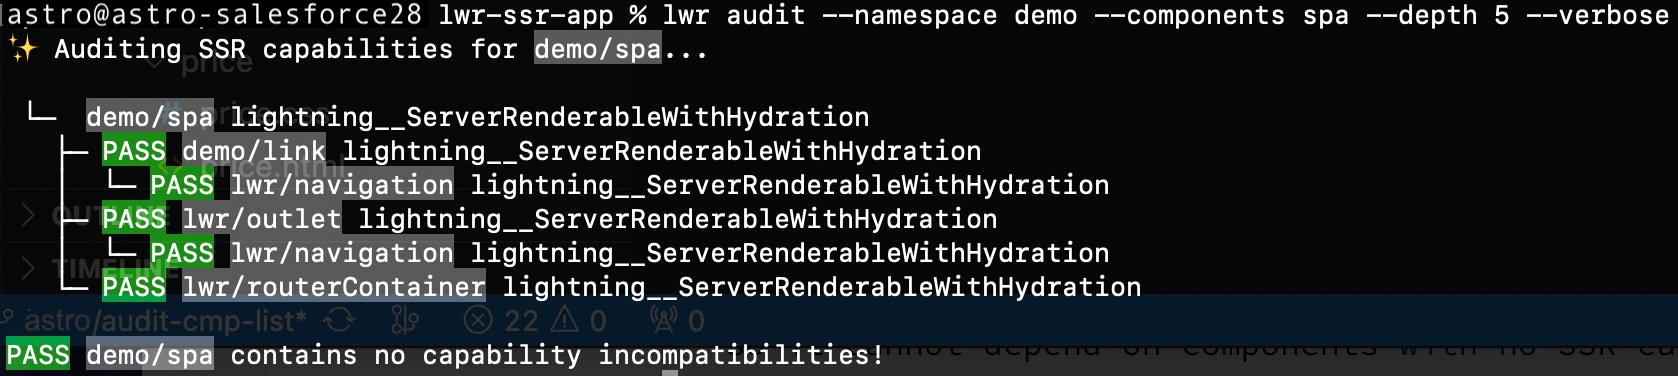 Screenshot of the CLI for a component tree that passed lwr audit tests.